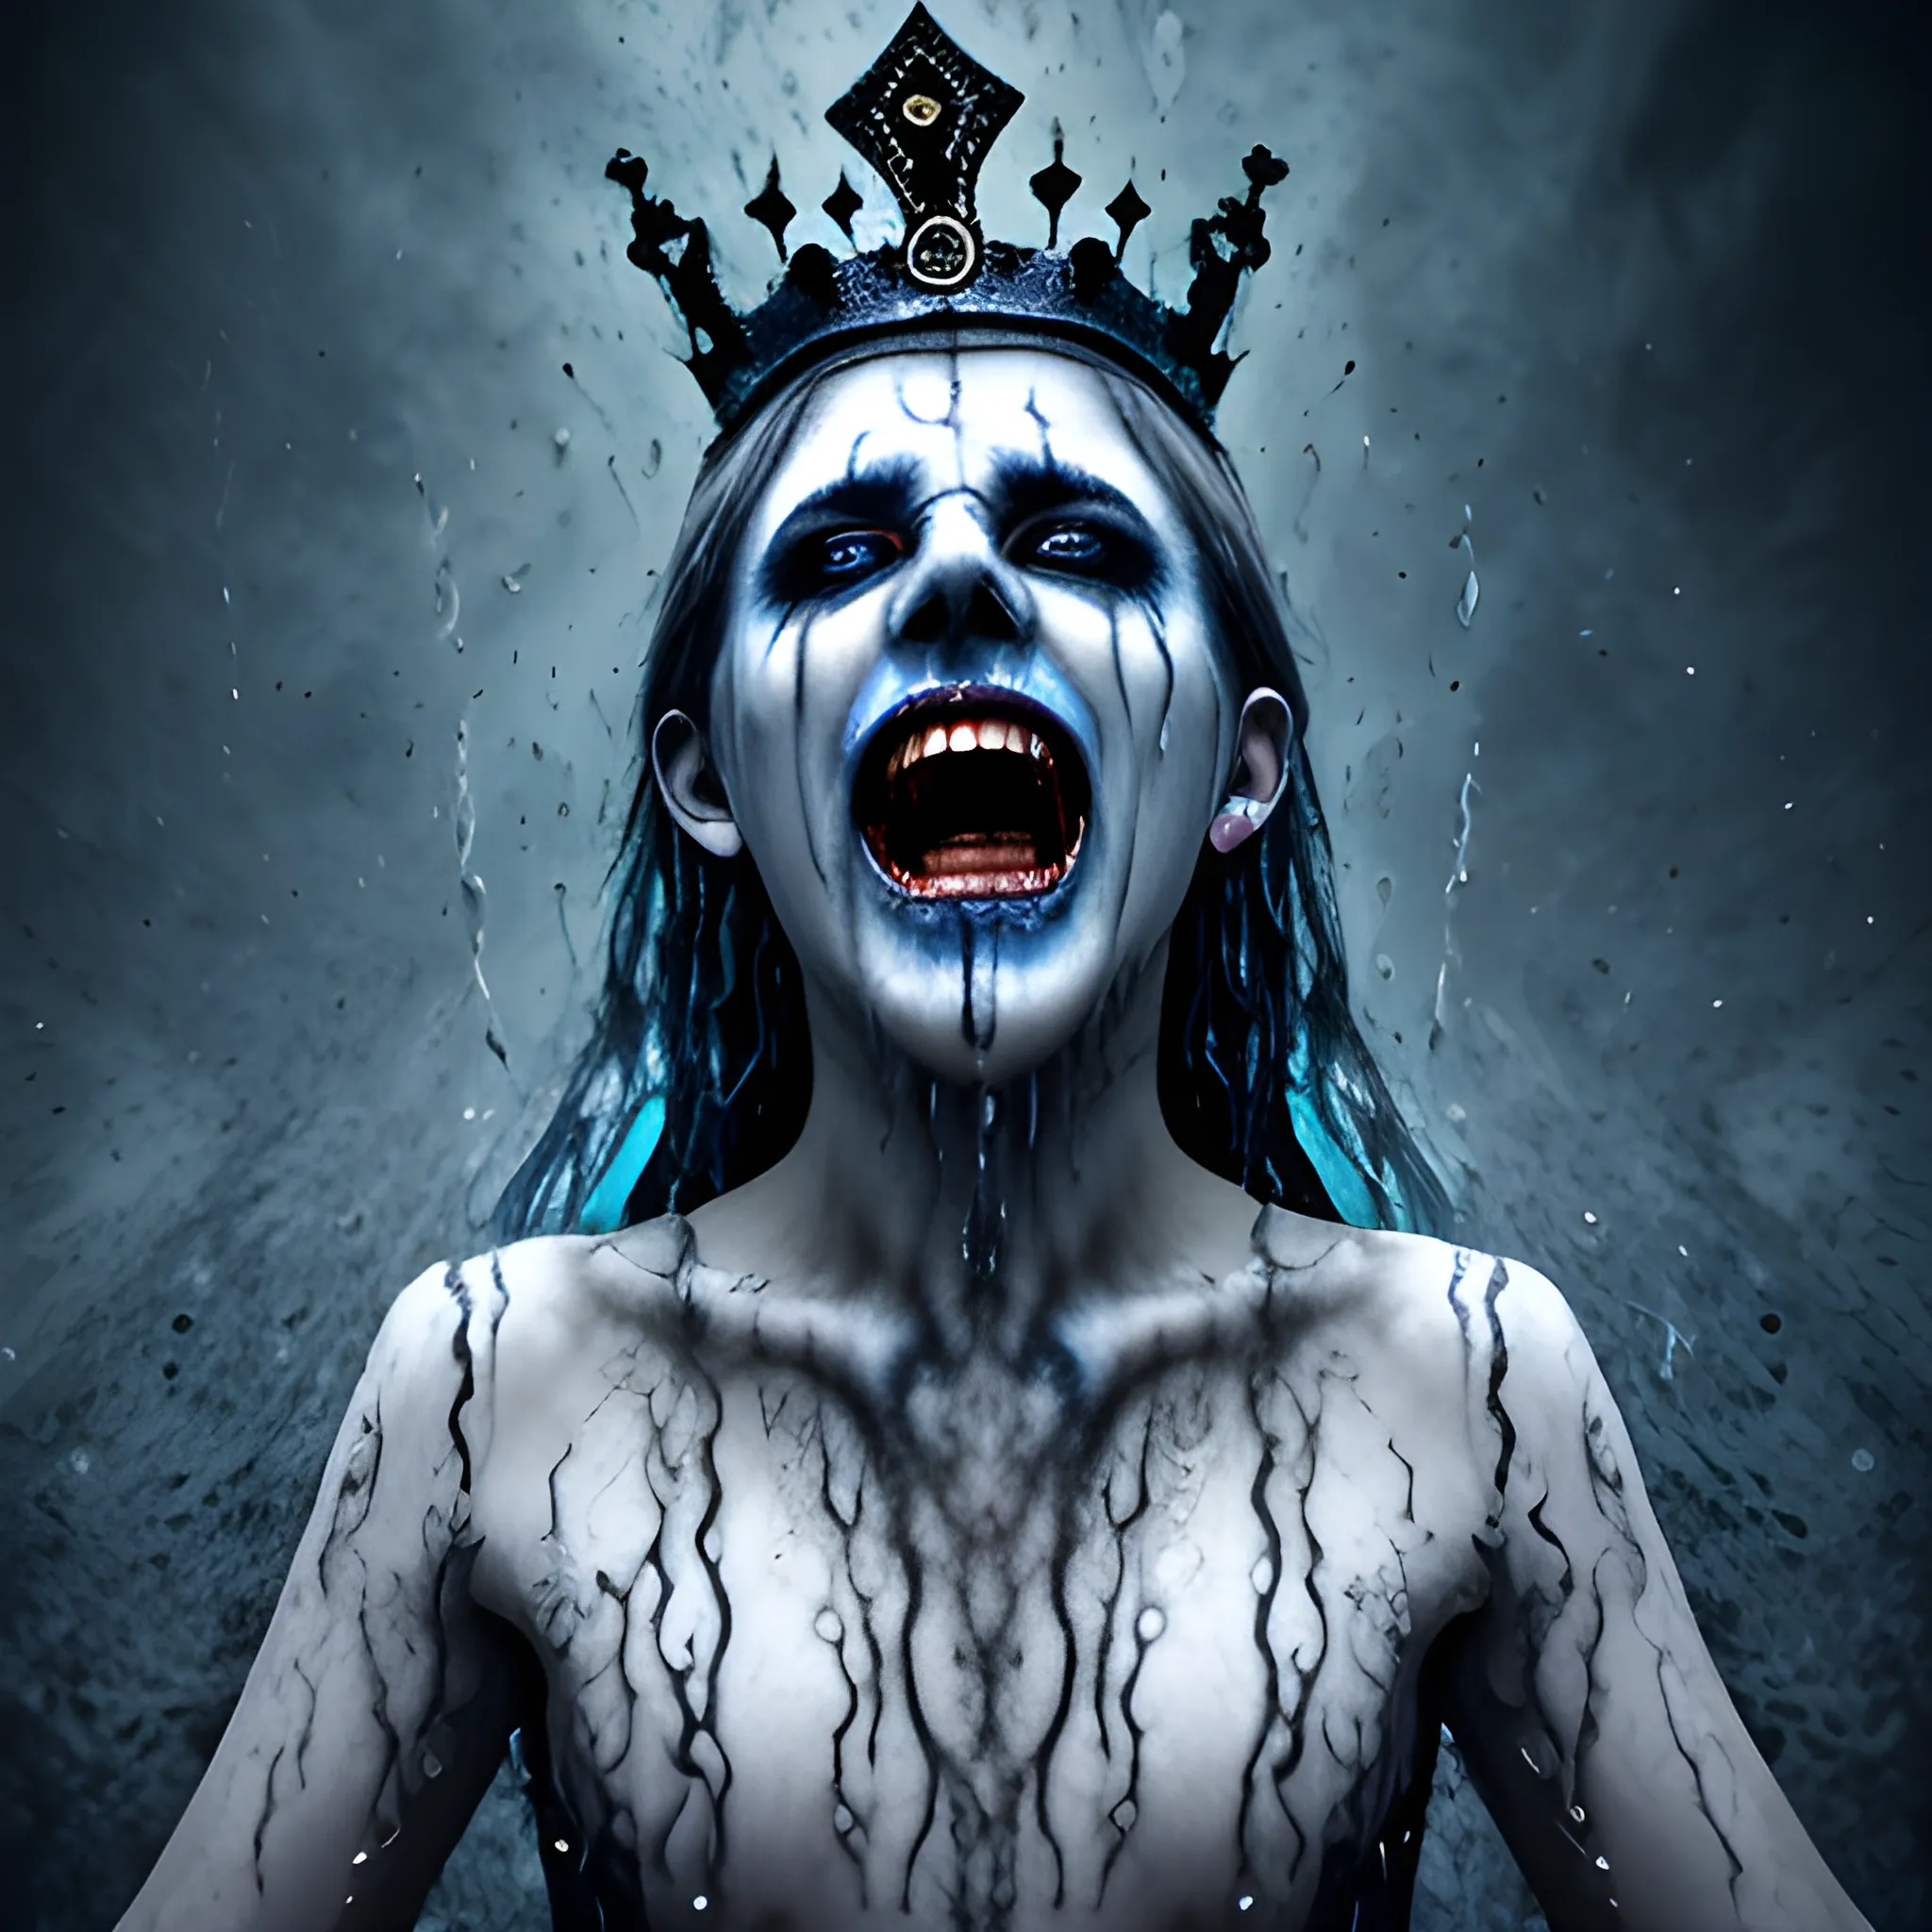 photorealistic image of the king of ghosts screaming with a black crown, full body, ominous smile, dimmed lighting, blue painted wet hair, wet makeup, evil grim, bokeh lighting